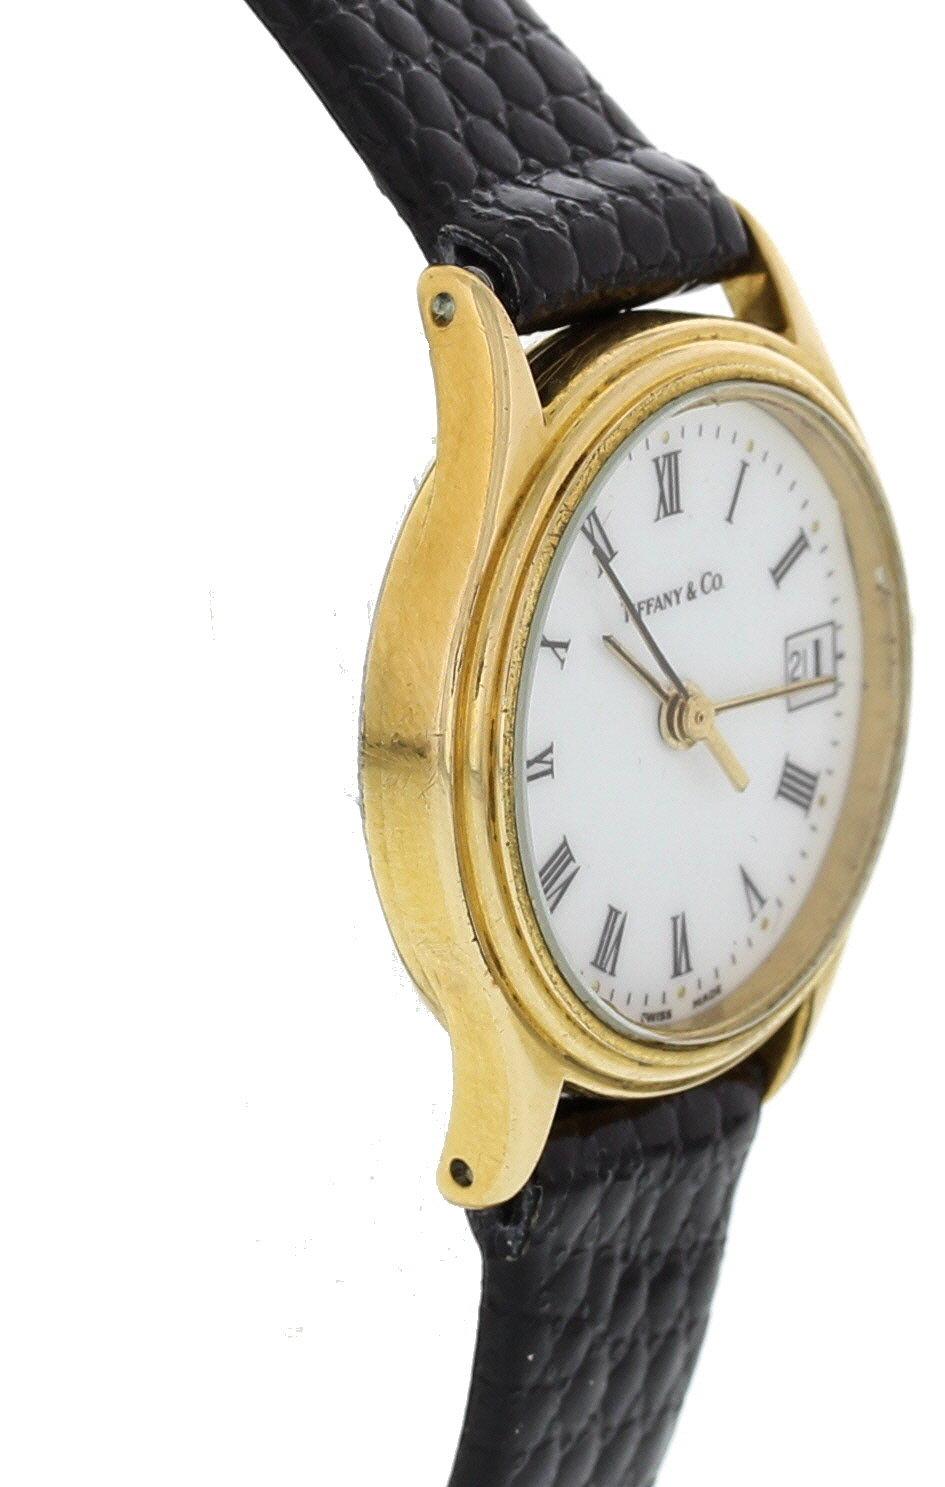 Ladies Tiffany & Co. Portfolio. Gold toned 23mm case. White dial with a date display. Quartz battery movement. Comes with a Tiffany box.
